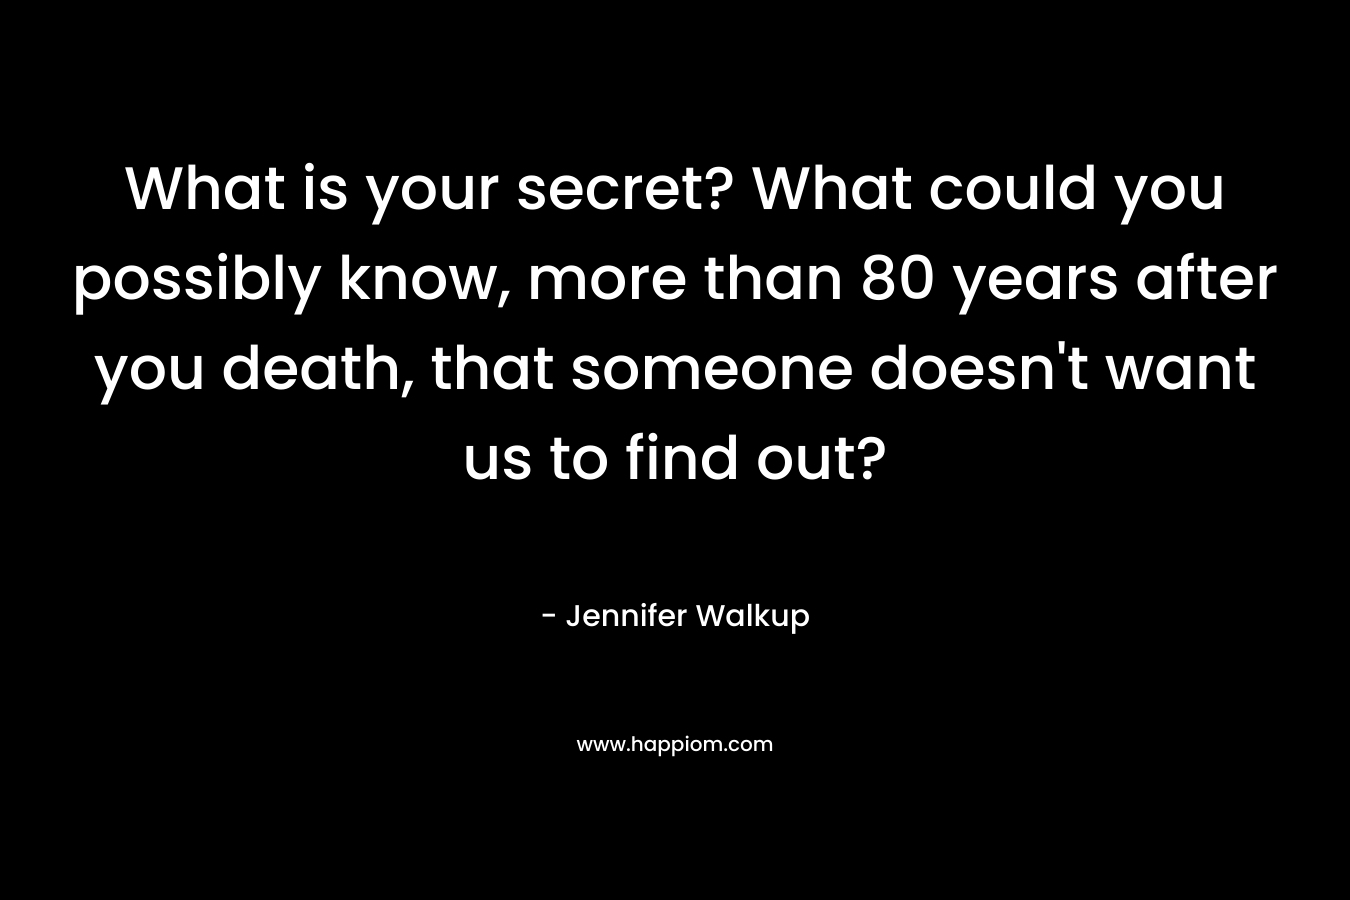 What is your secret? What could you possibly know, more than 80 years after you death, that someone doesn’t want us to find out? – Jennifer Walkup